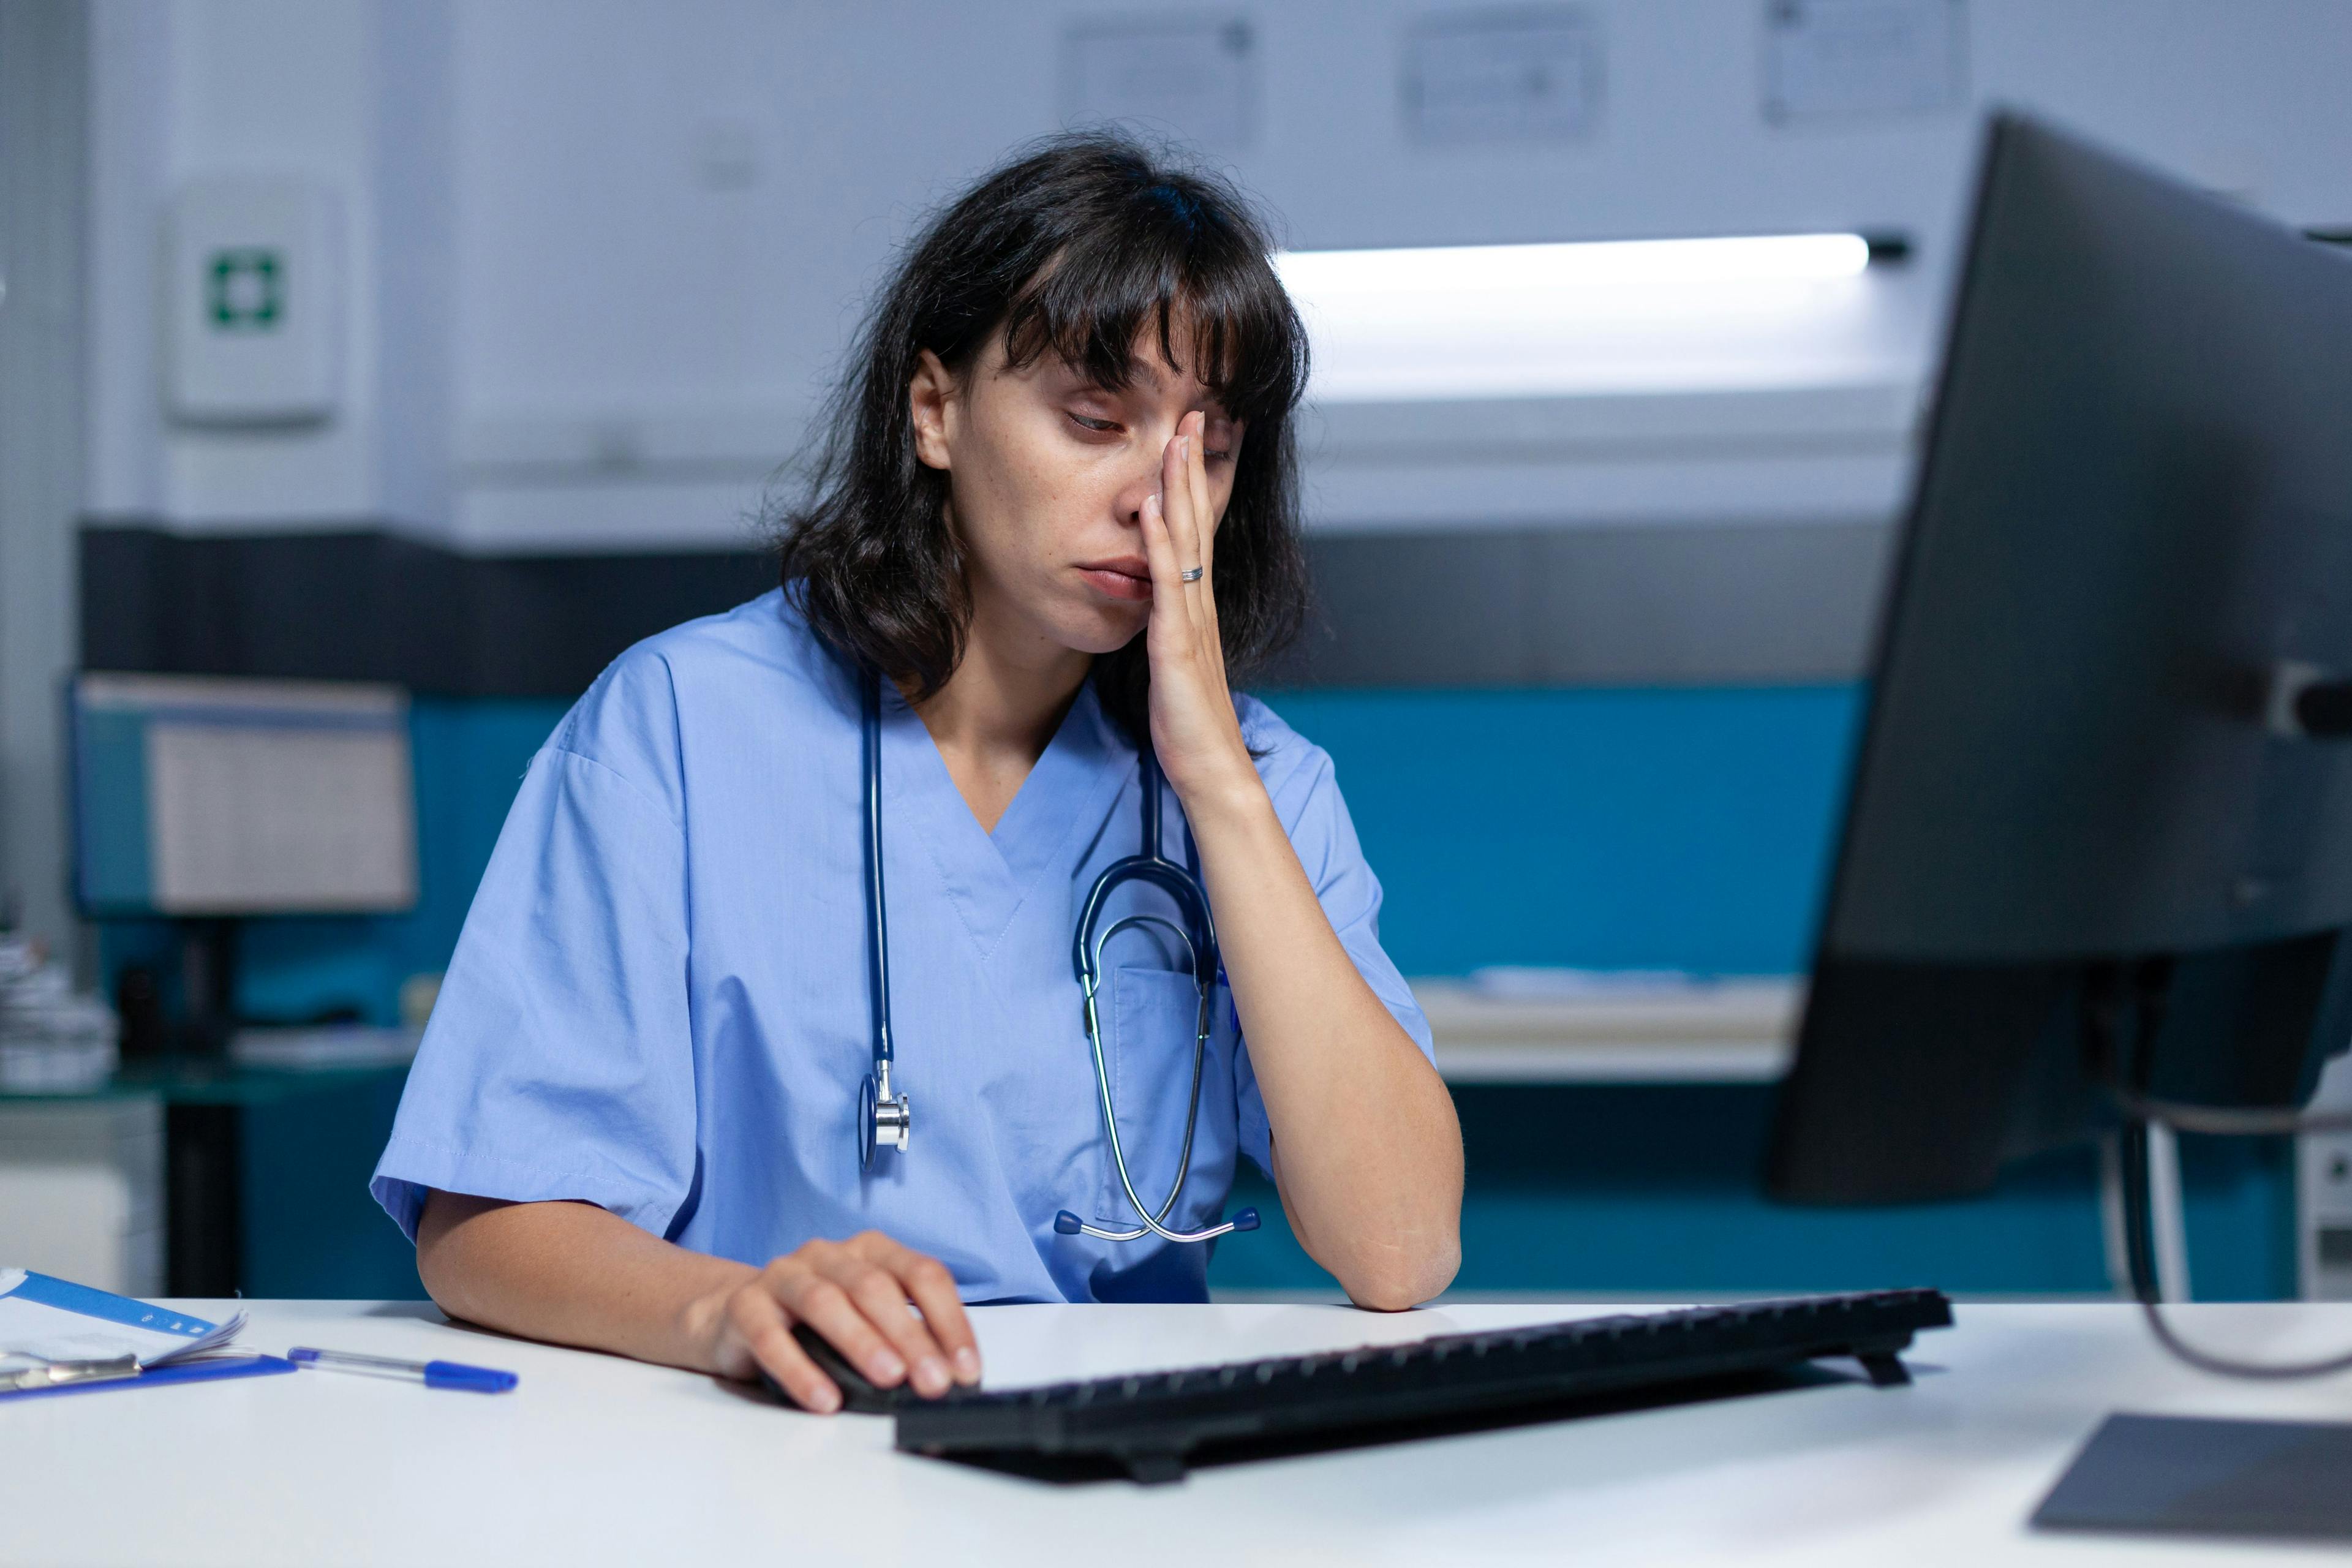 Doctor rubs face in front of computer | © DC Studio - stock.adobe.com